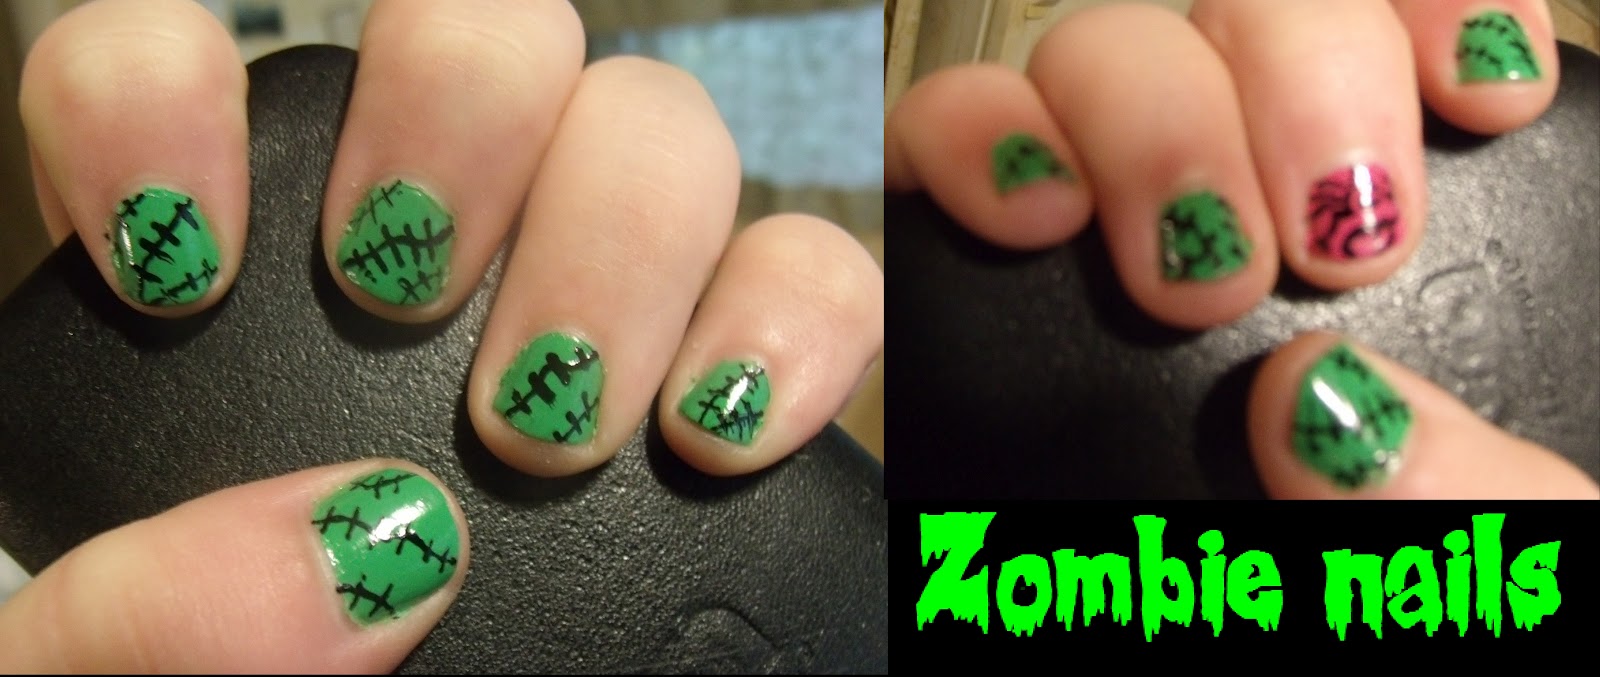 4. "Halloween Nail Art: Zombie Nails" - wide 5